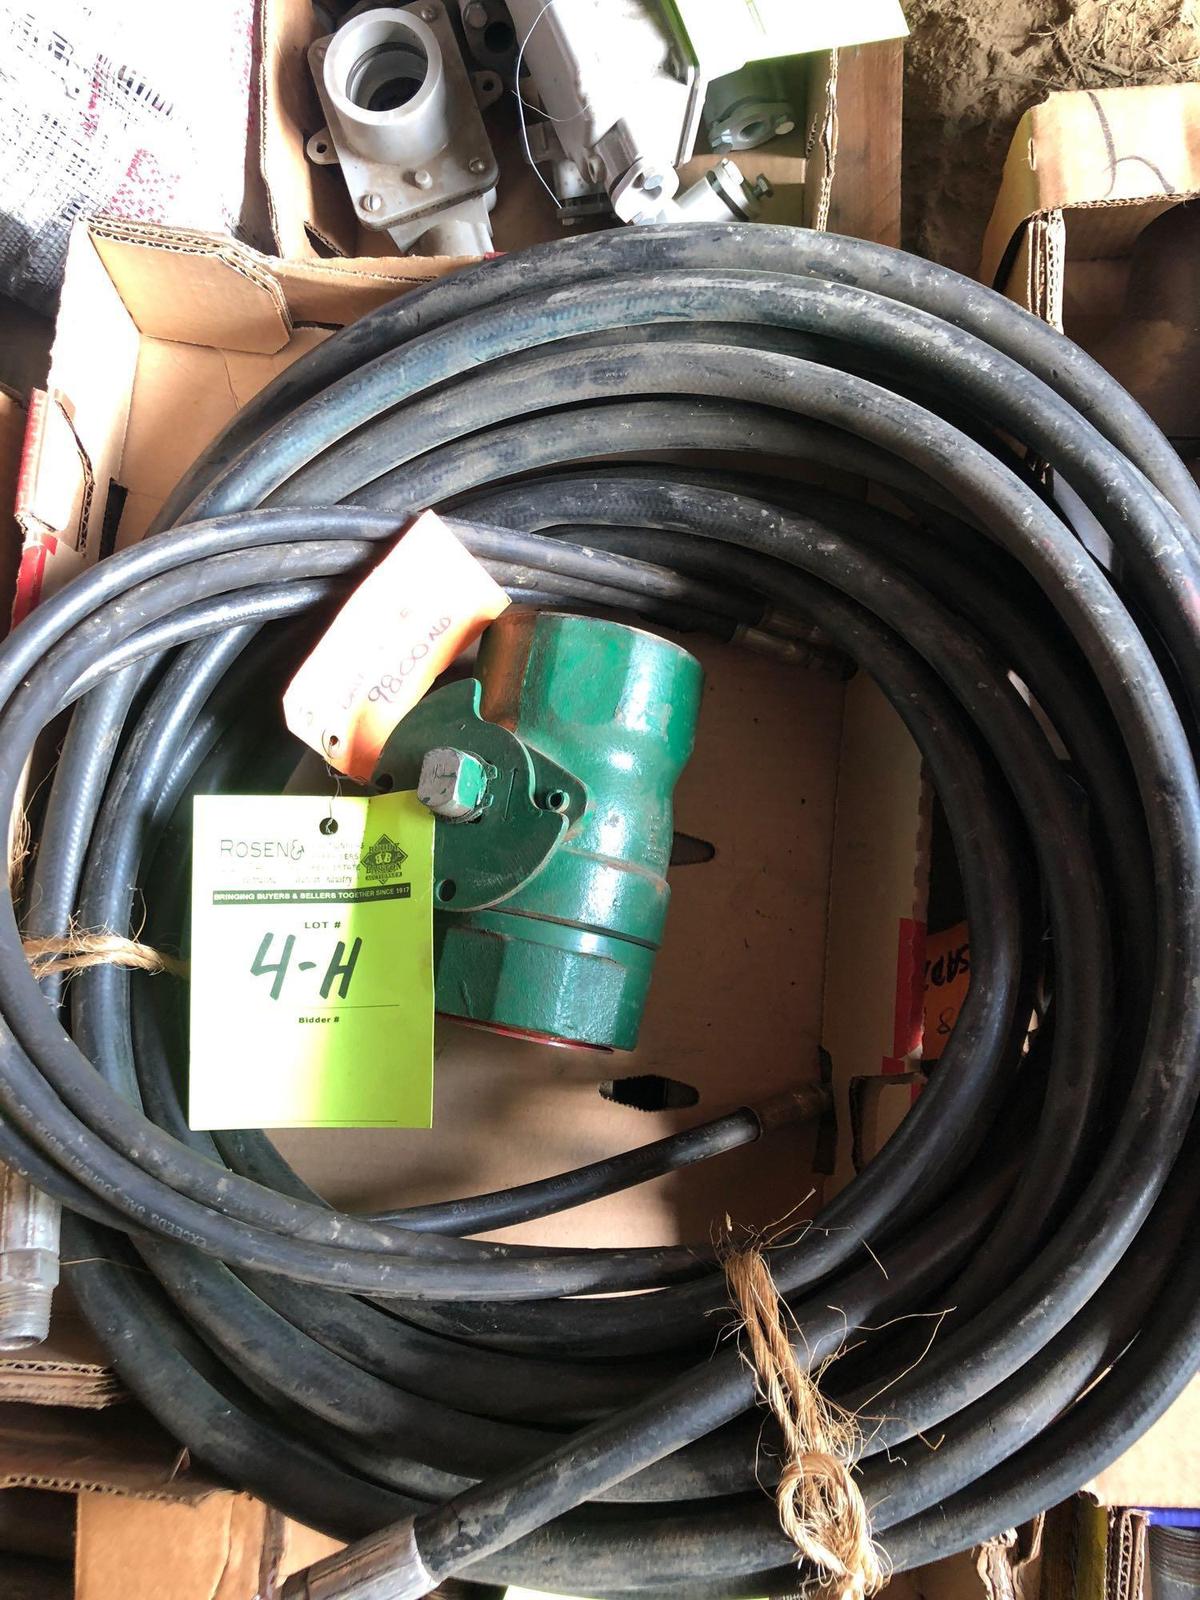 New Hydraulic hoses and (1) New 3 in Demco Ball Valve